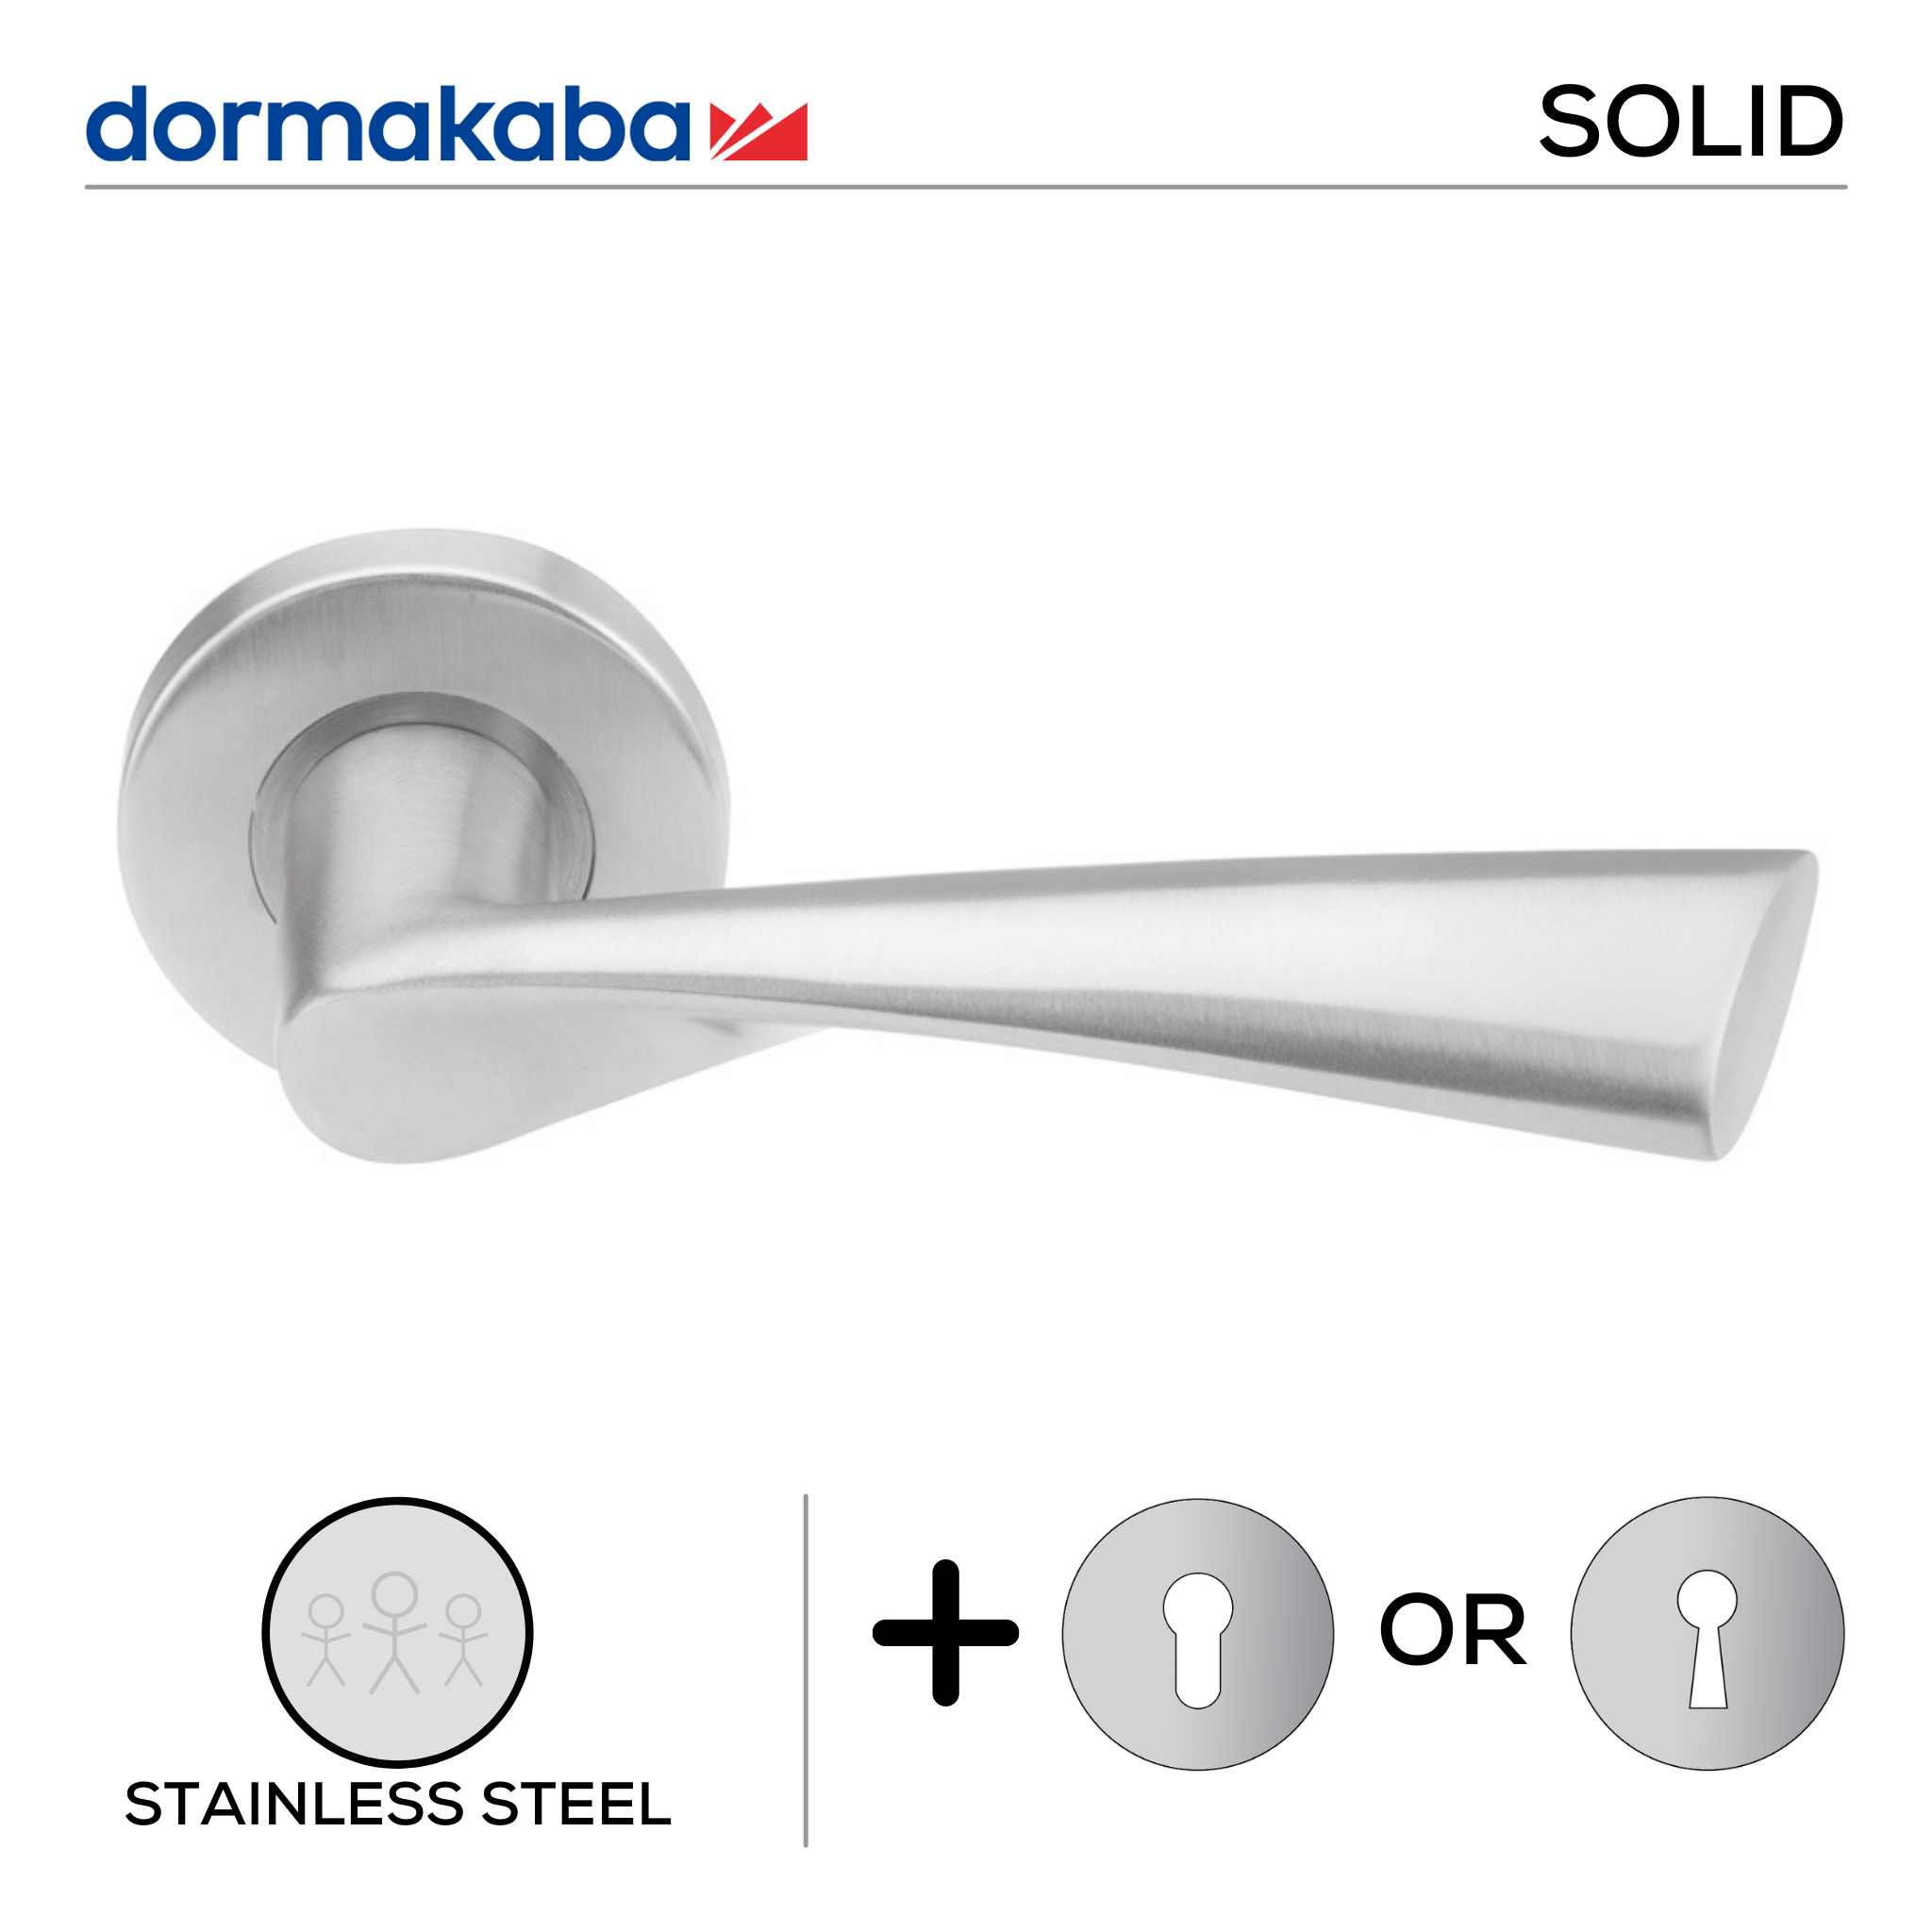 SH 815, Lever Handles, Solid, On Round Rose, With Escutcheons, 139mm (l), Stainless Steel, DORMAKABA